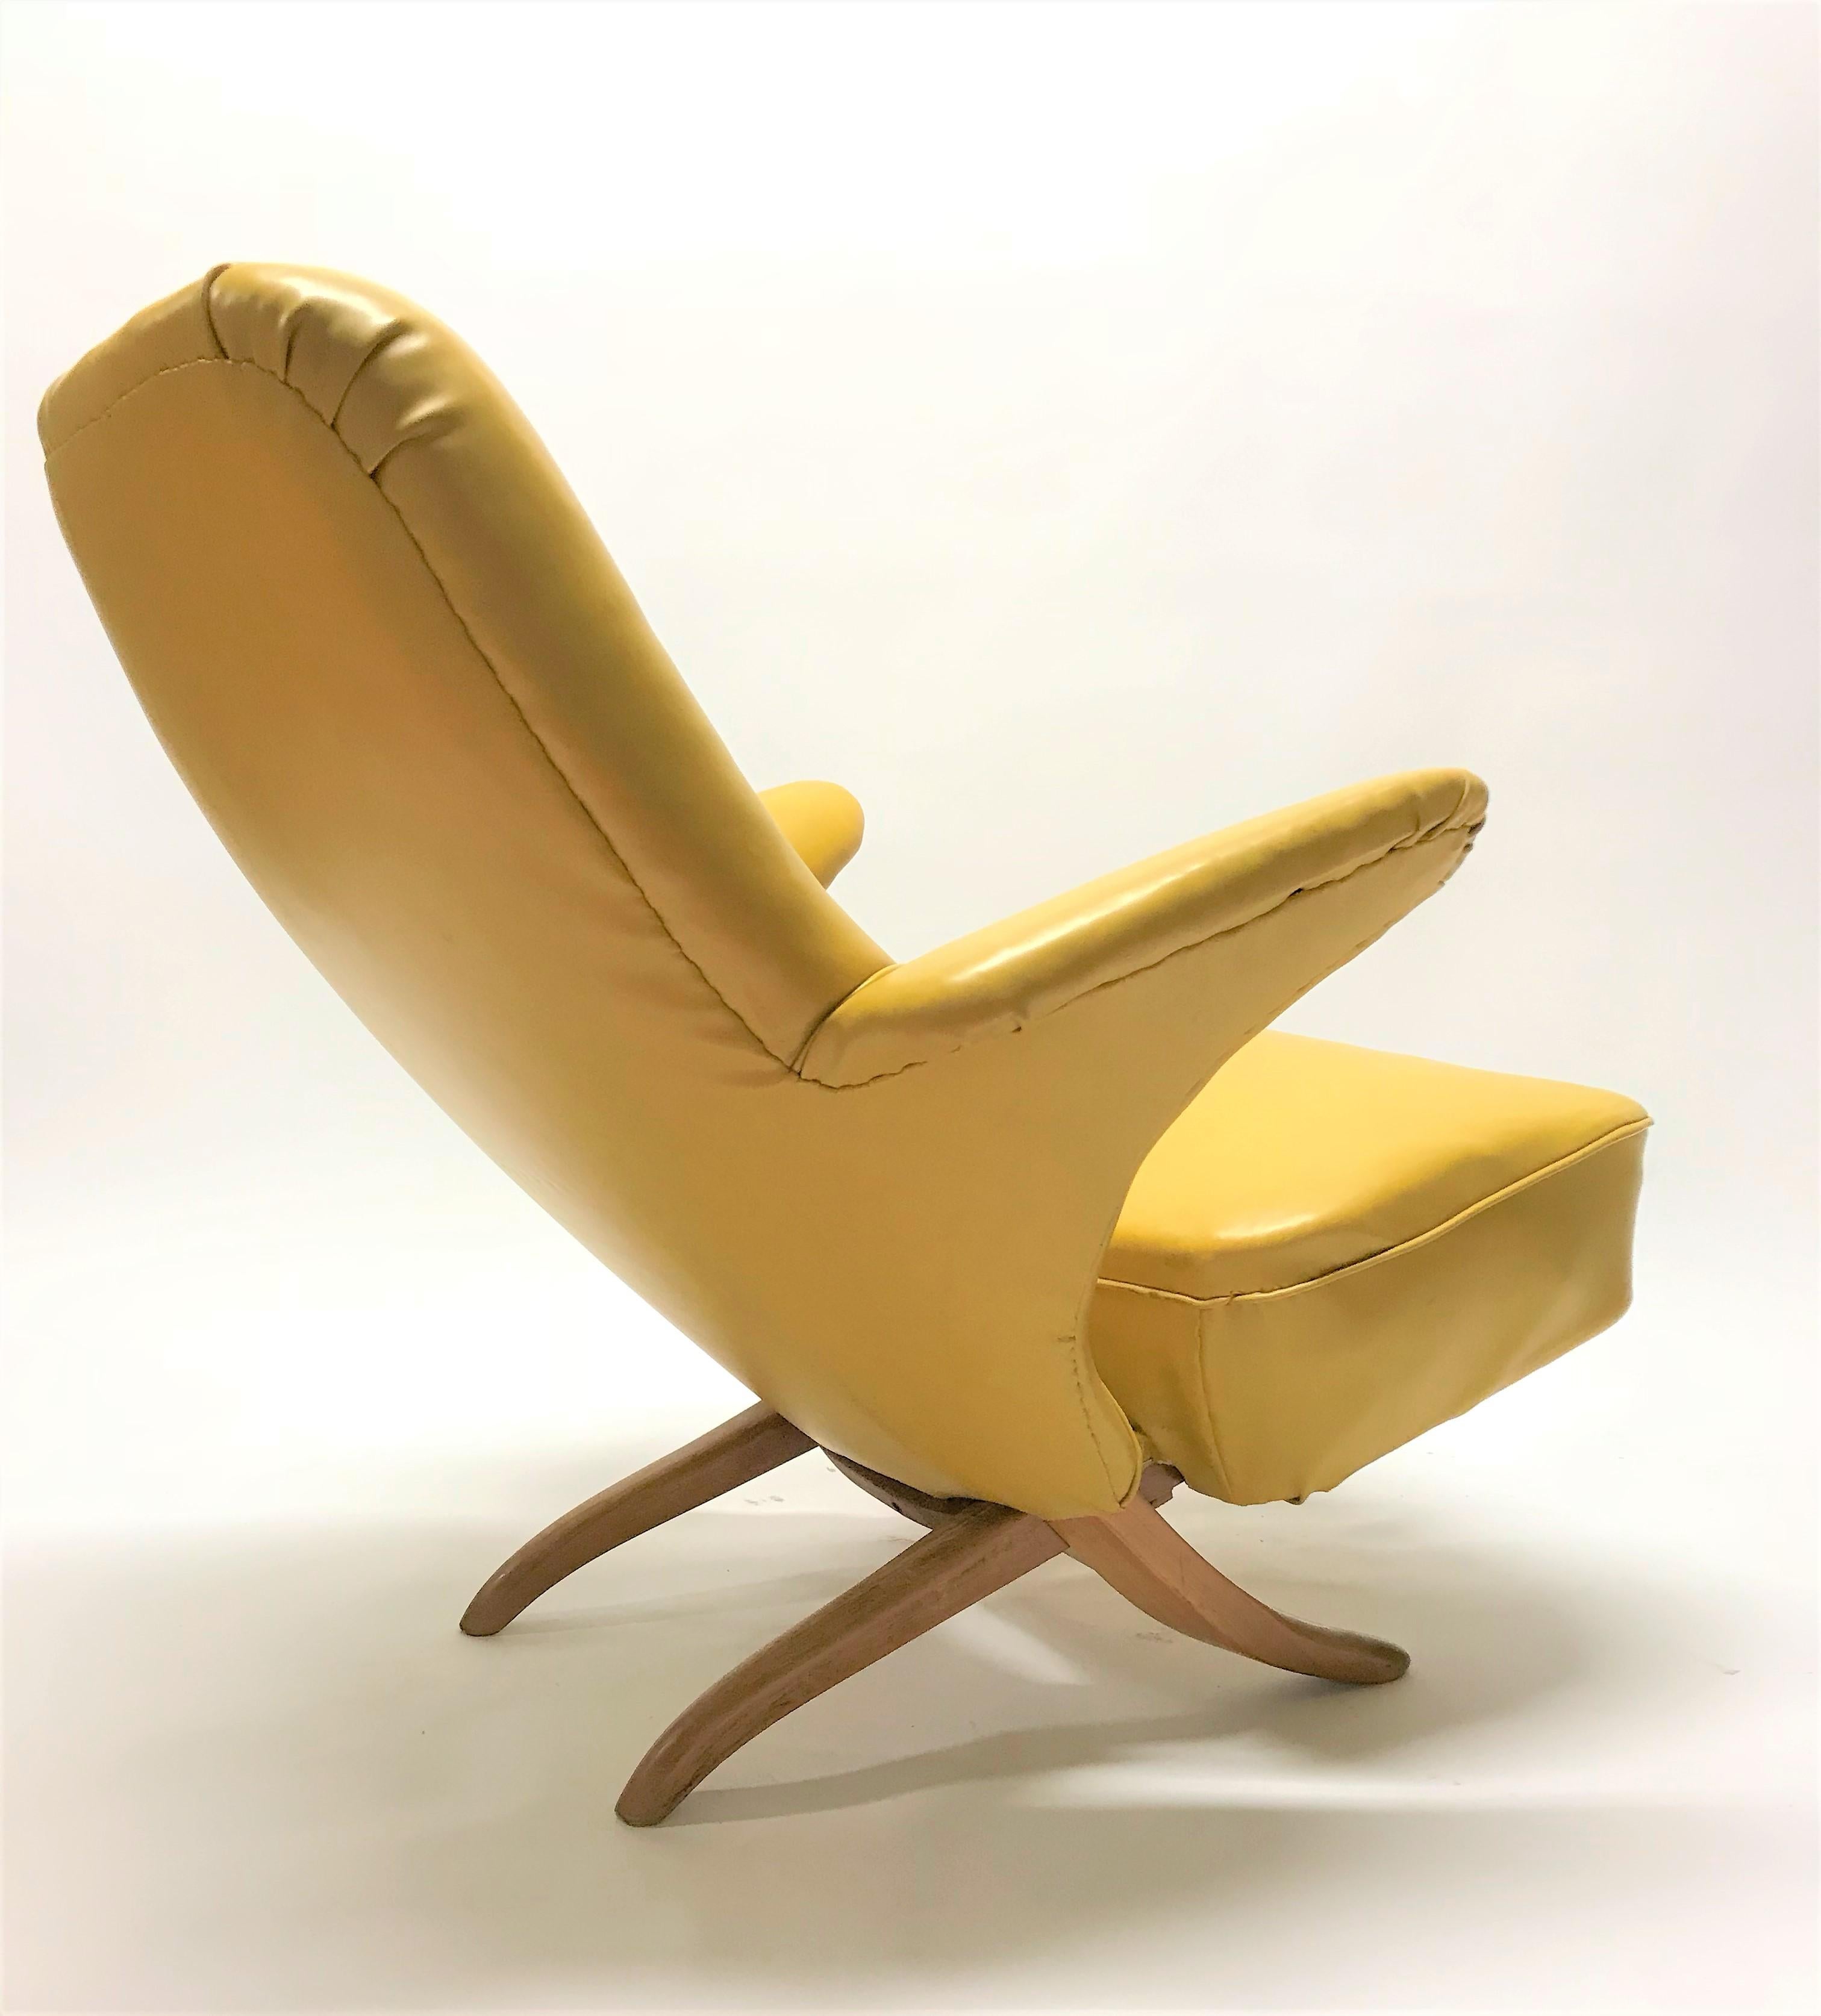 A rare yellow penguin lounge chair by Theo Ruth for Artifort. A modular design comprised of two interlocking pieces, seat and back can separate. 

The chair sits very comfortably.

Original skai upholstery with no defaults. 

1960s,